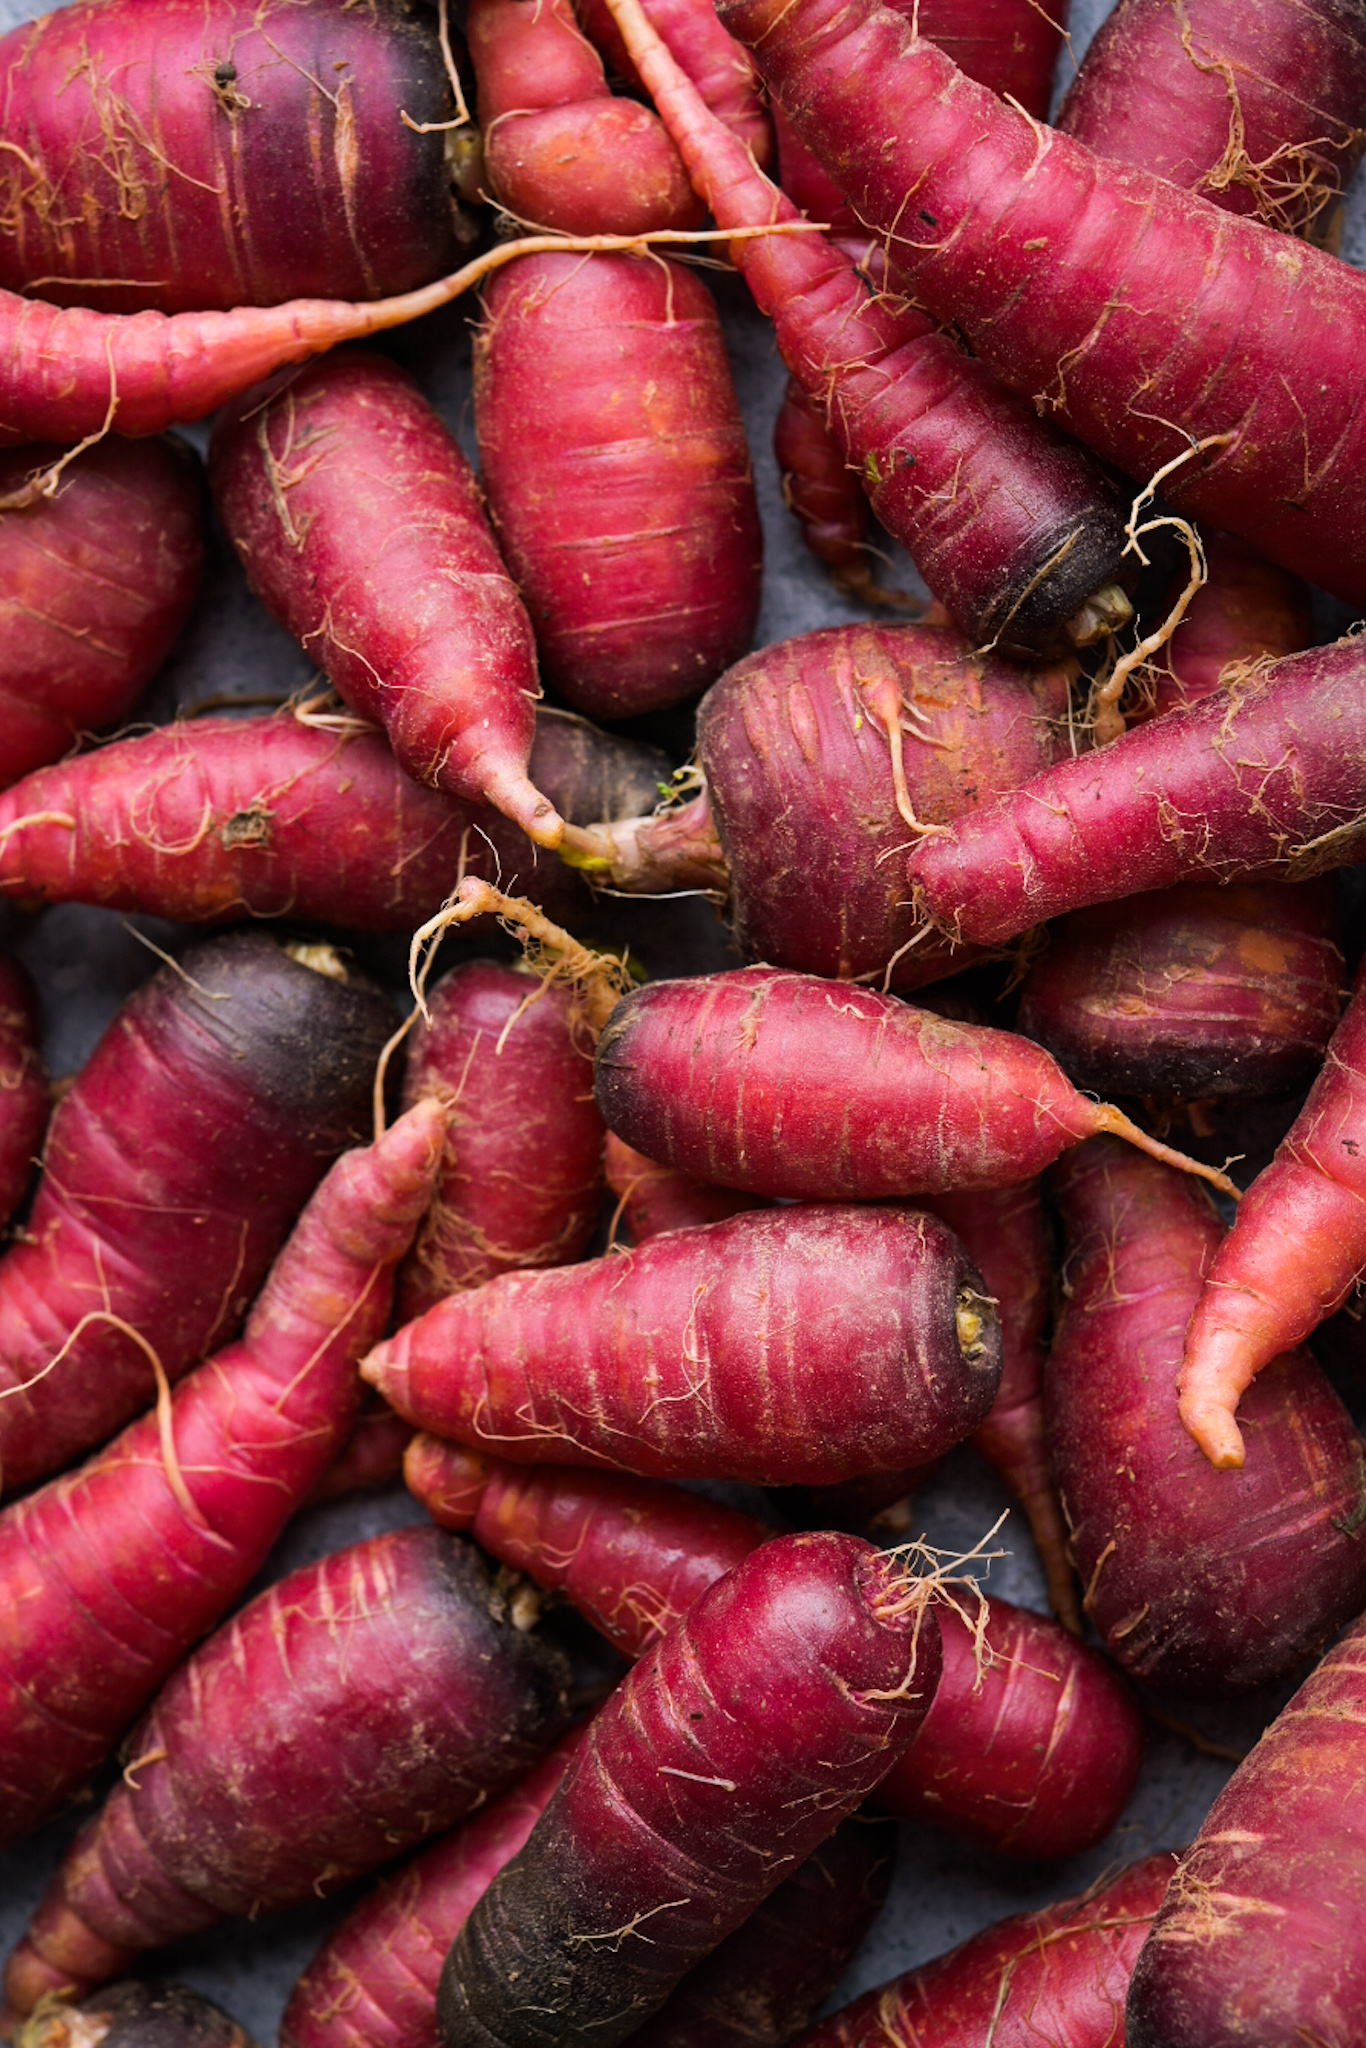 Cosmic Purple carrots from Amorphous Gardens in New Orleans